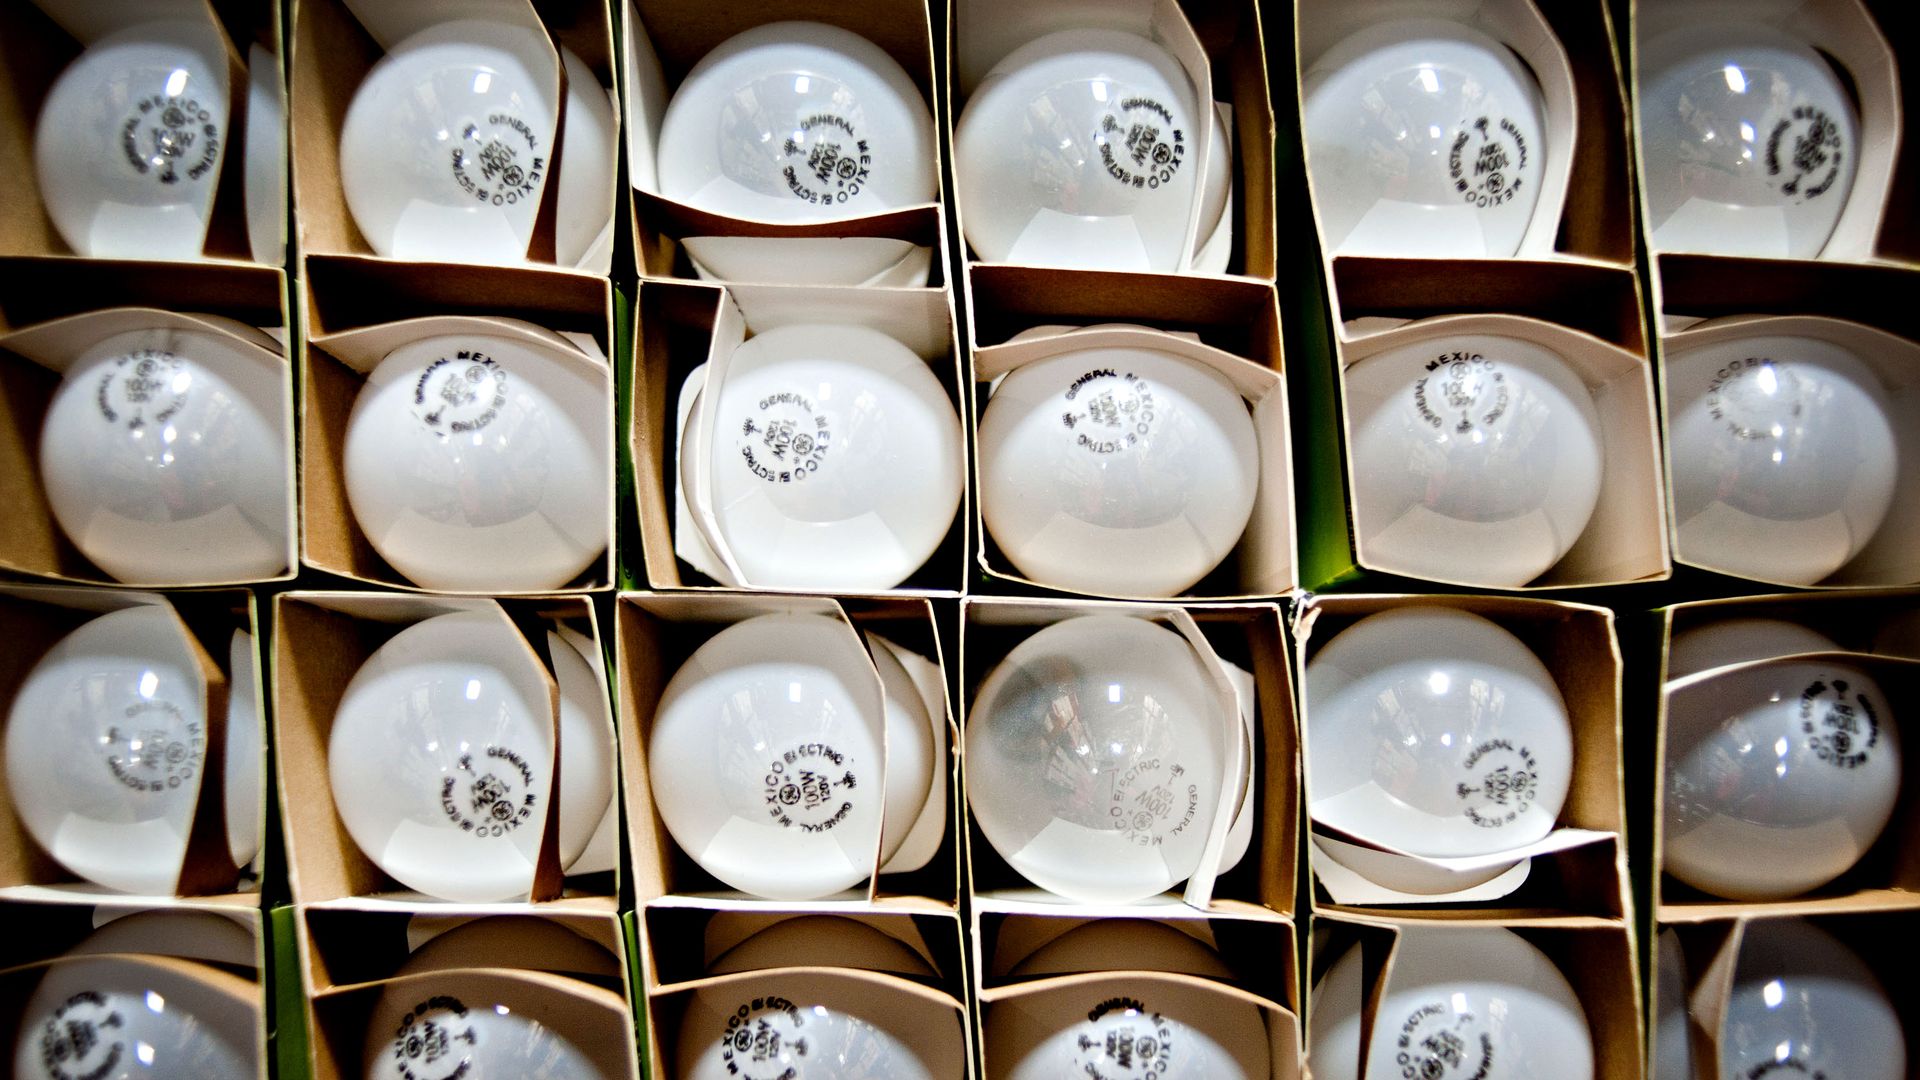 General Electric Co. 100-watt incandescent bulbs sit on a shelf at the Kennedy Webster Electric Co. warehouse in Downers Grove, Illinois, U.S., on Tuesday, July 19, 2011.